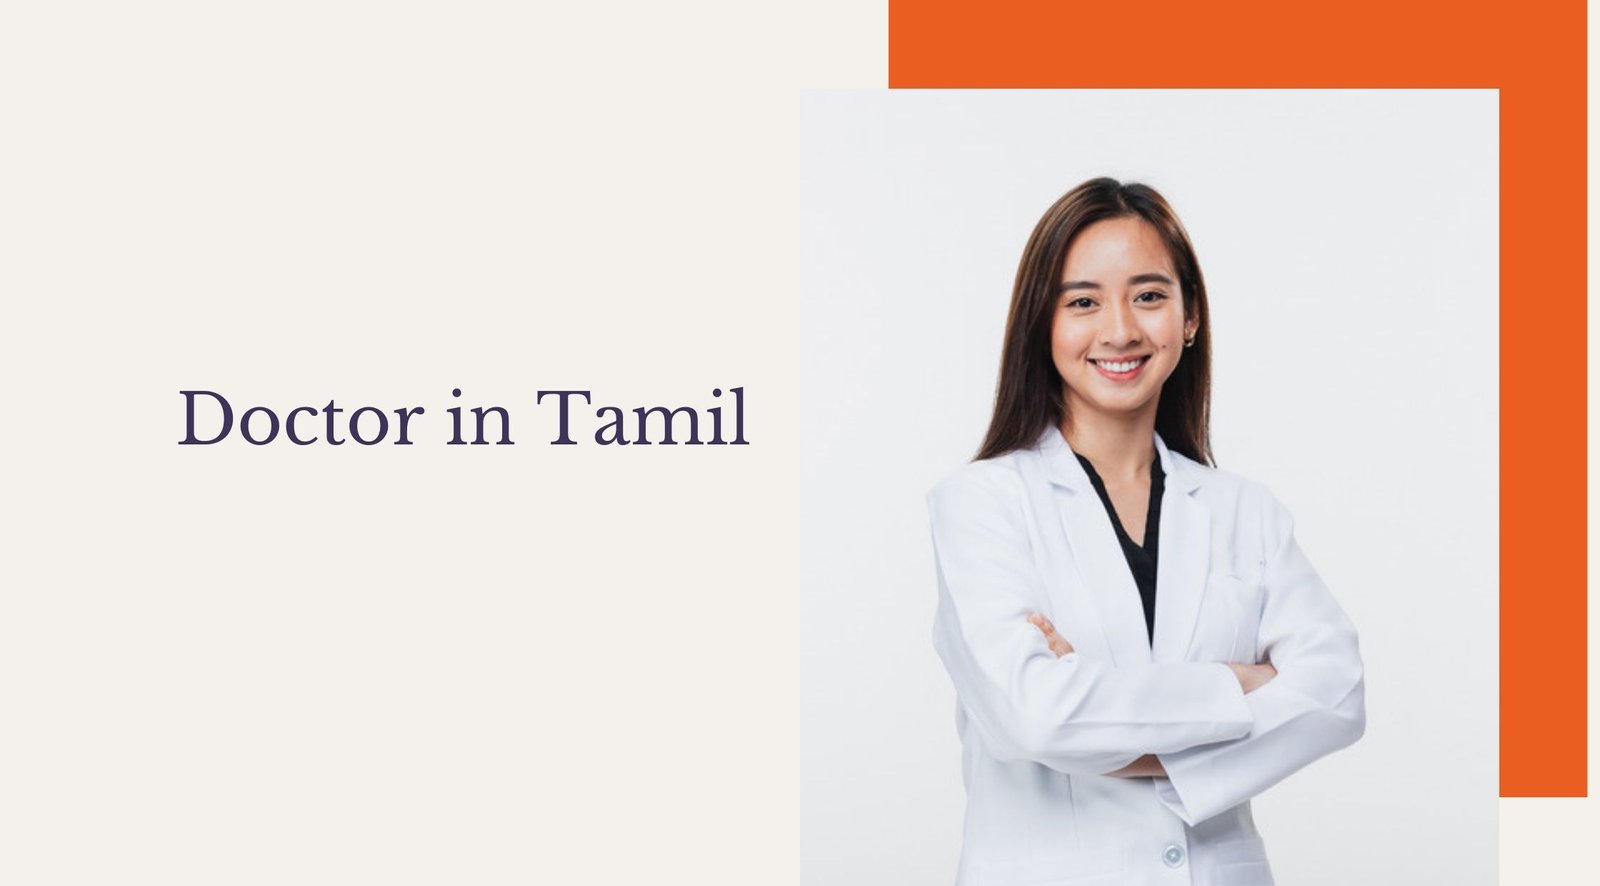 Doctor Meaning in Tamil